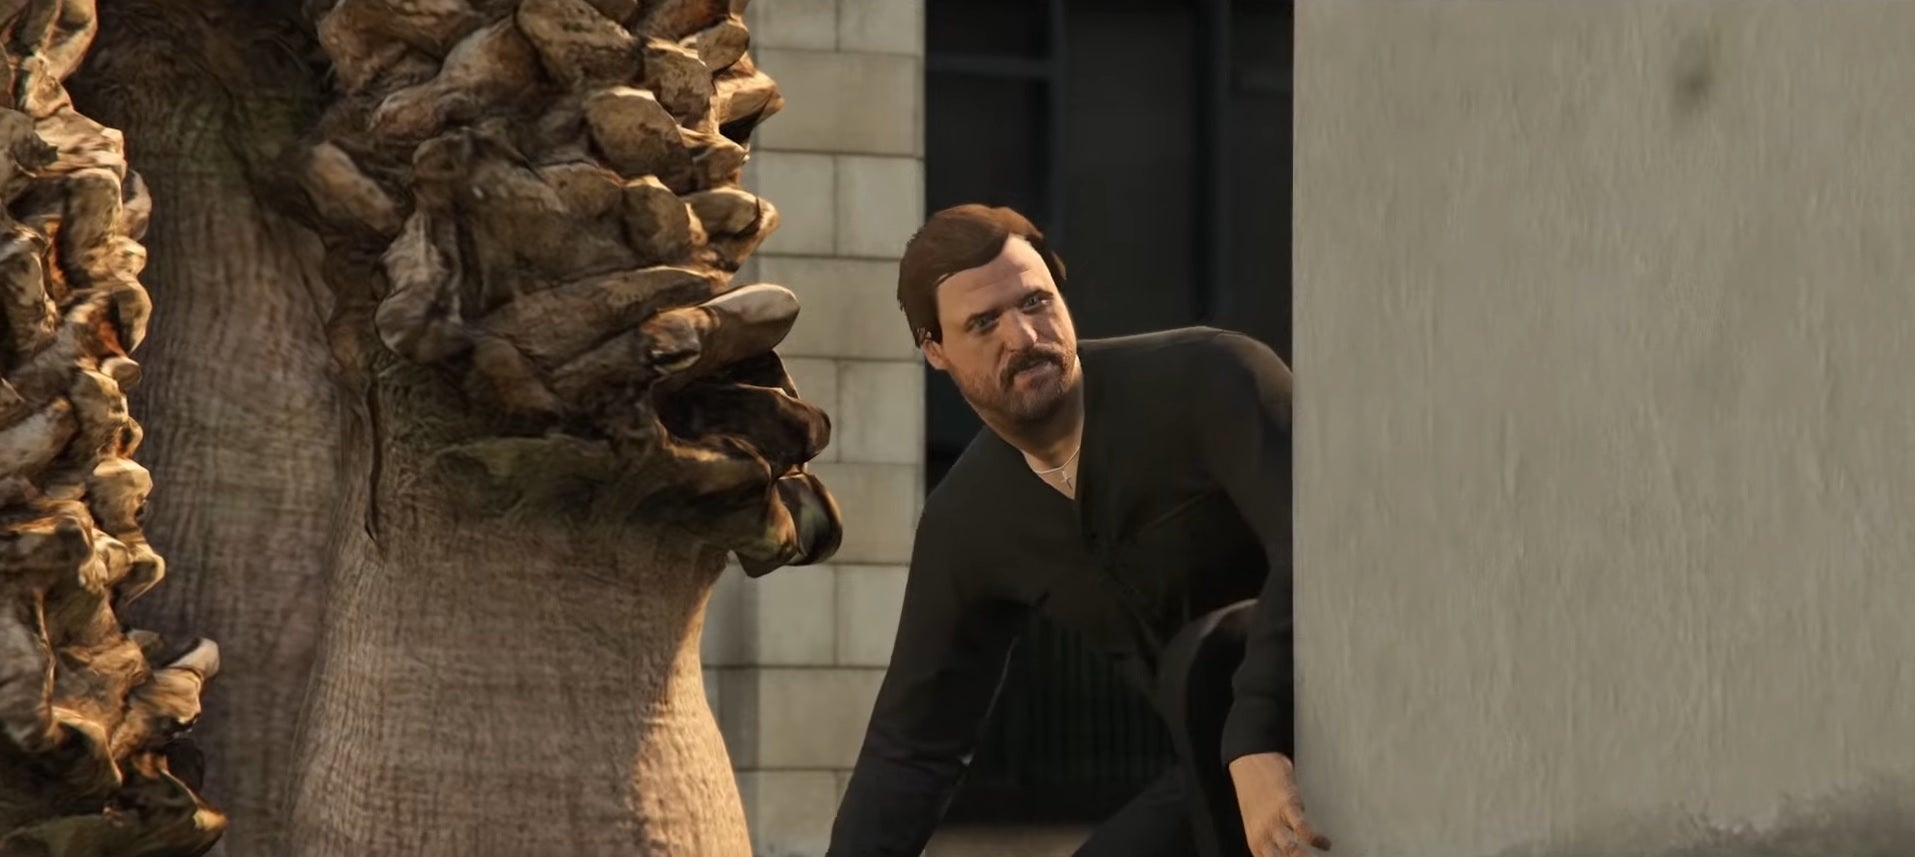 Image for Rockstar releases new music video, shot entirely in GTA 5